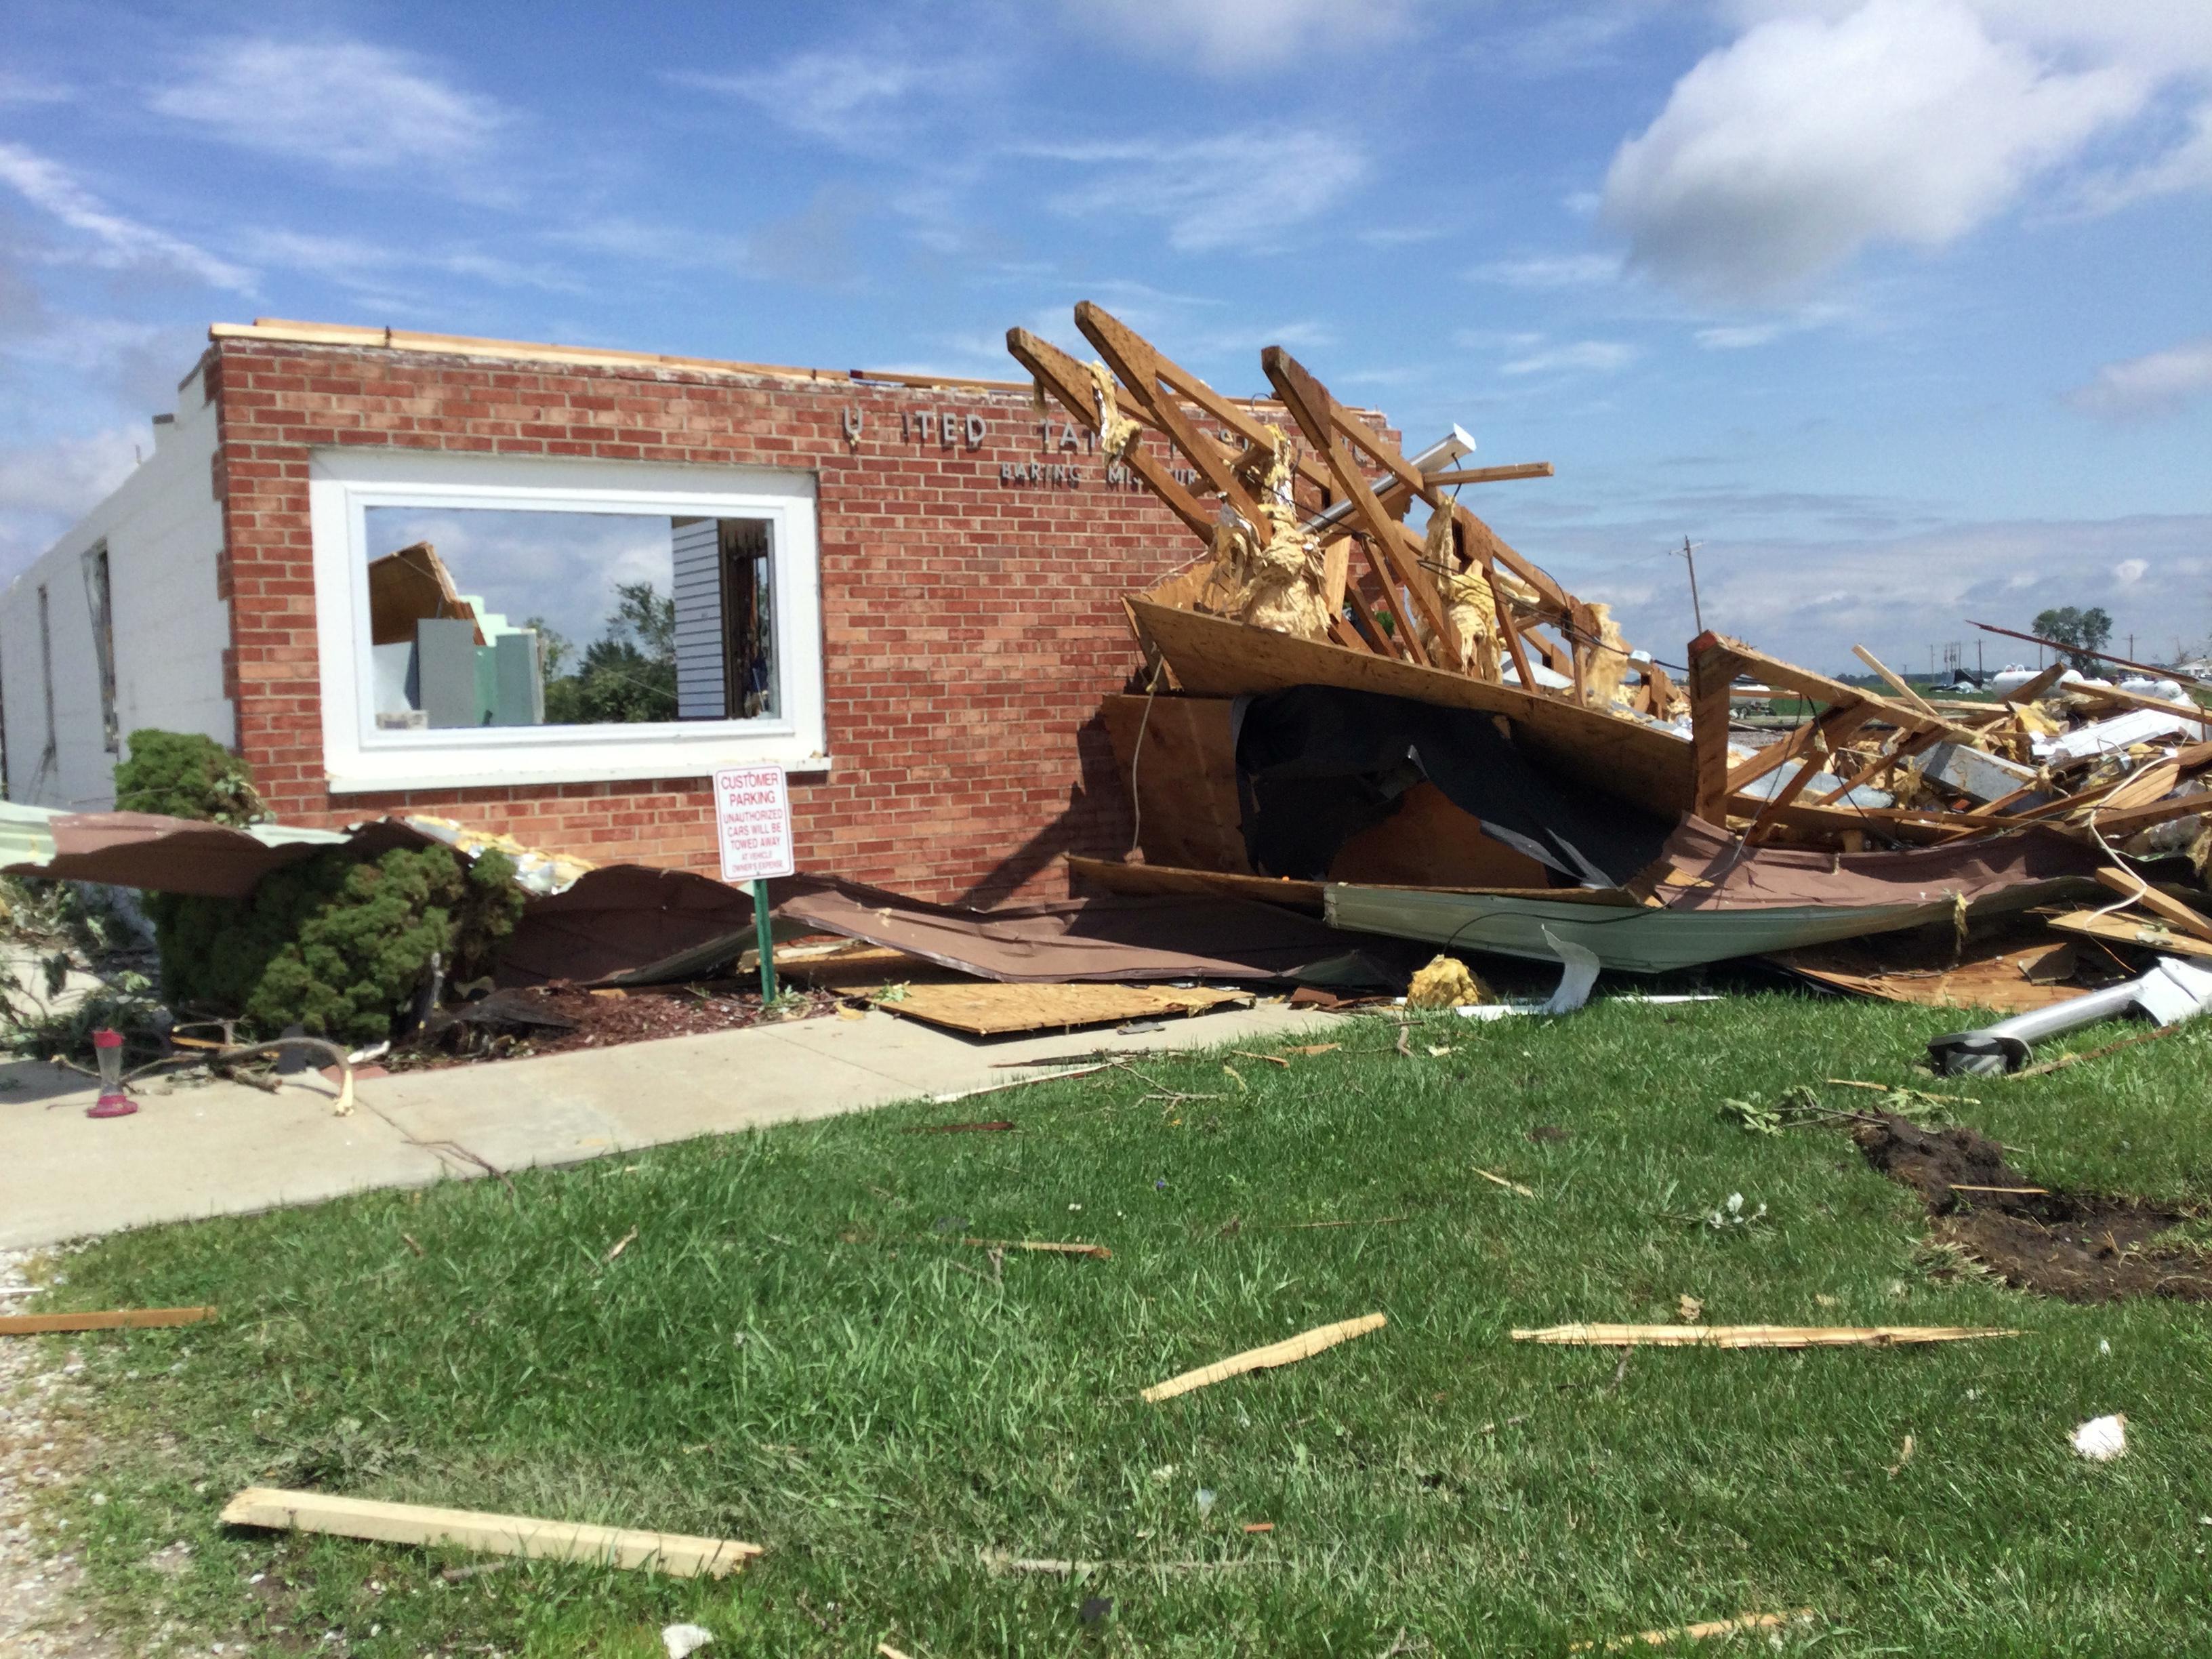 Picture of destroyed US post office in Baring Missouri.